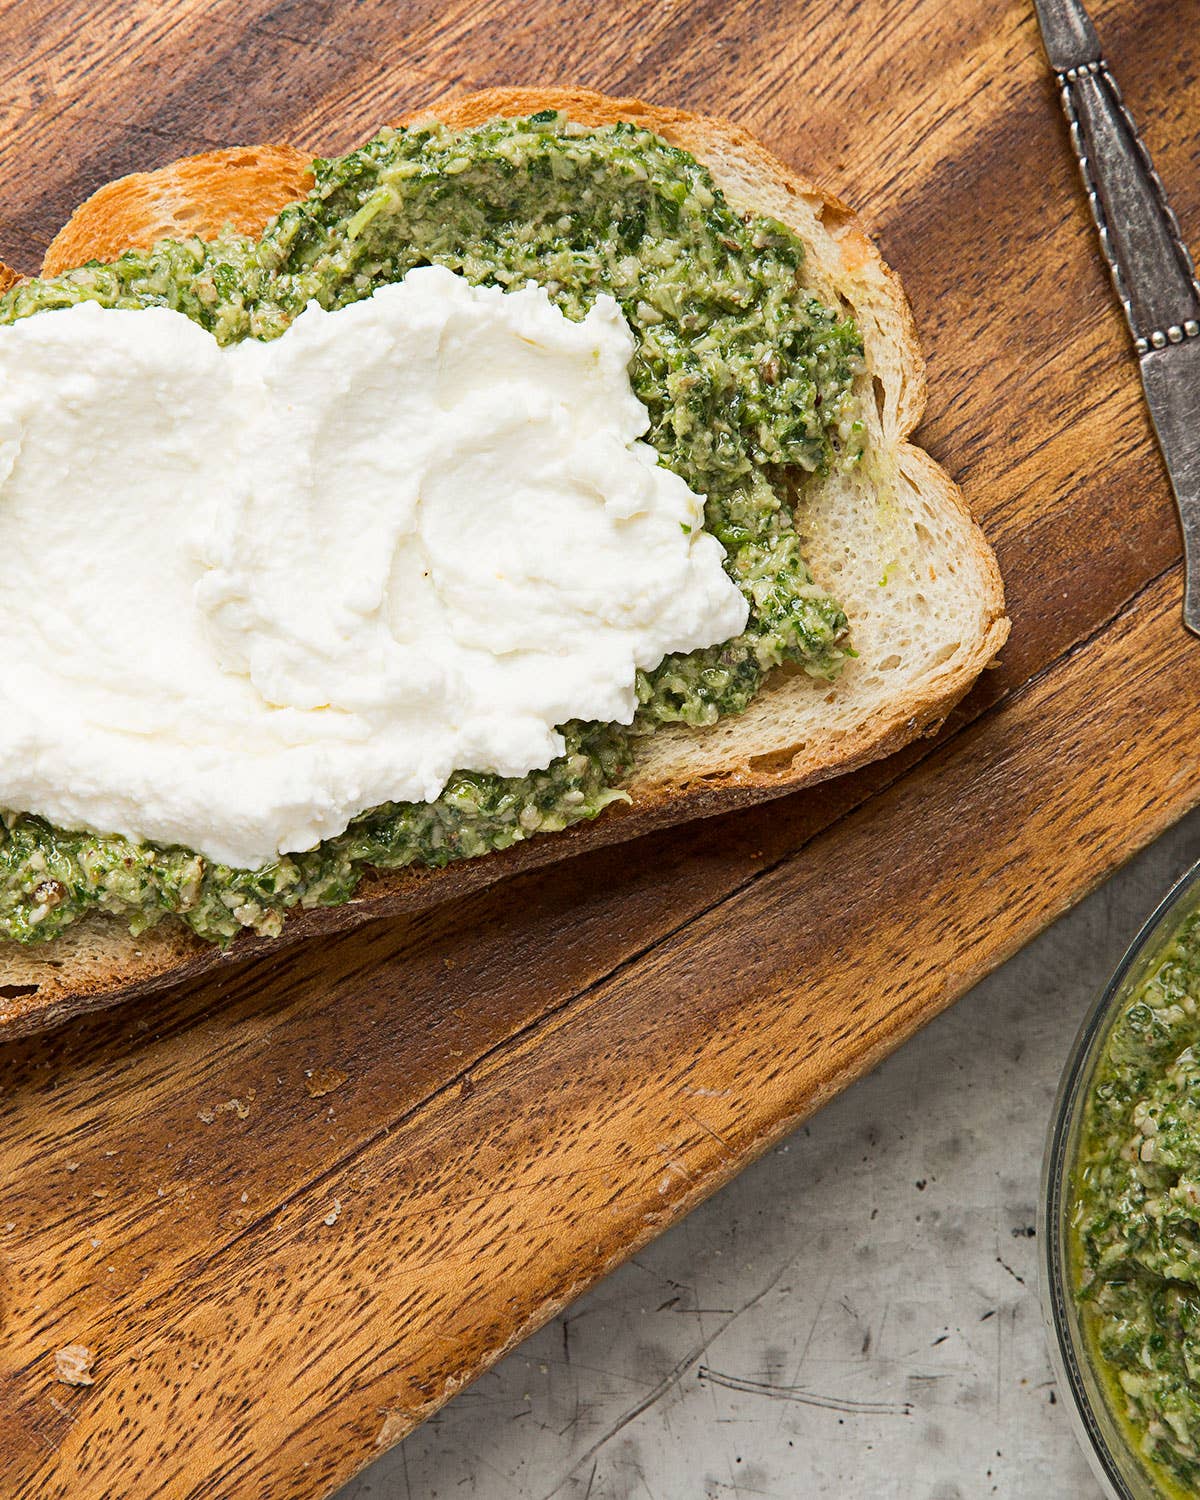 NYC to CSA: A Pesto for Your Pea Shoots